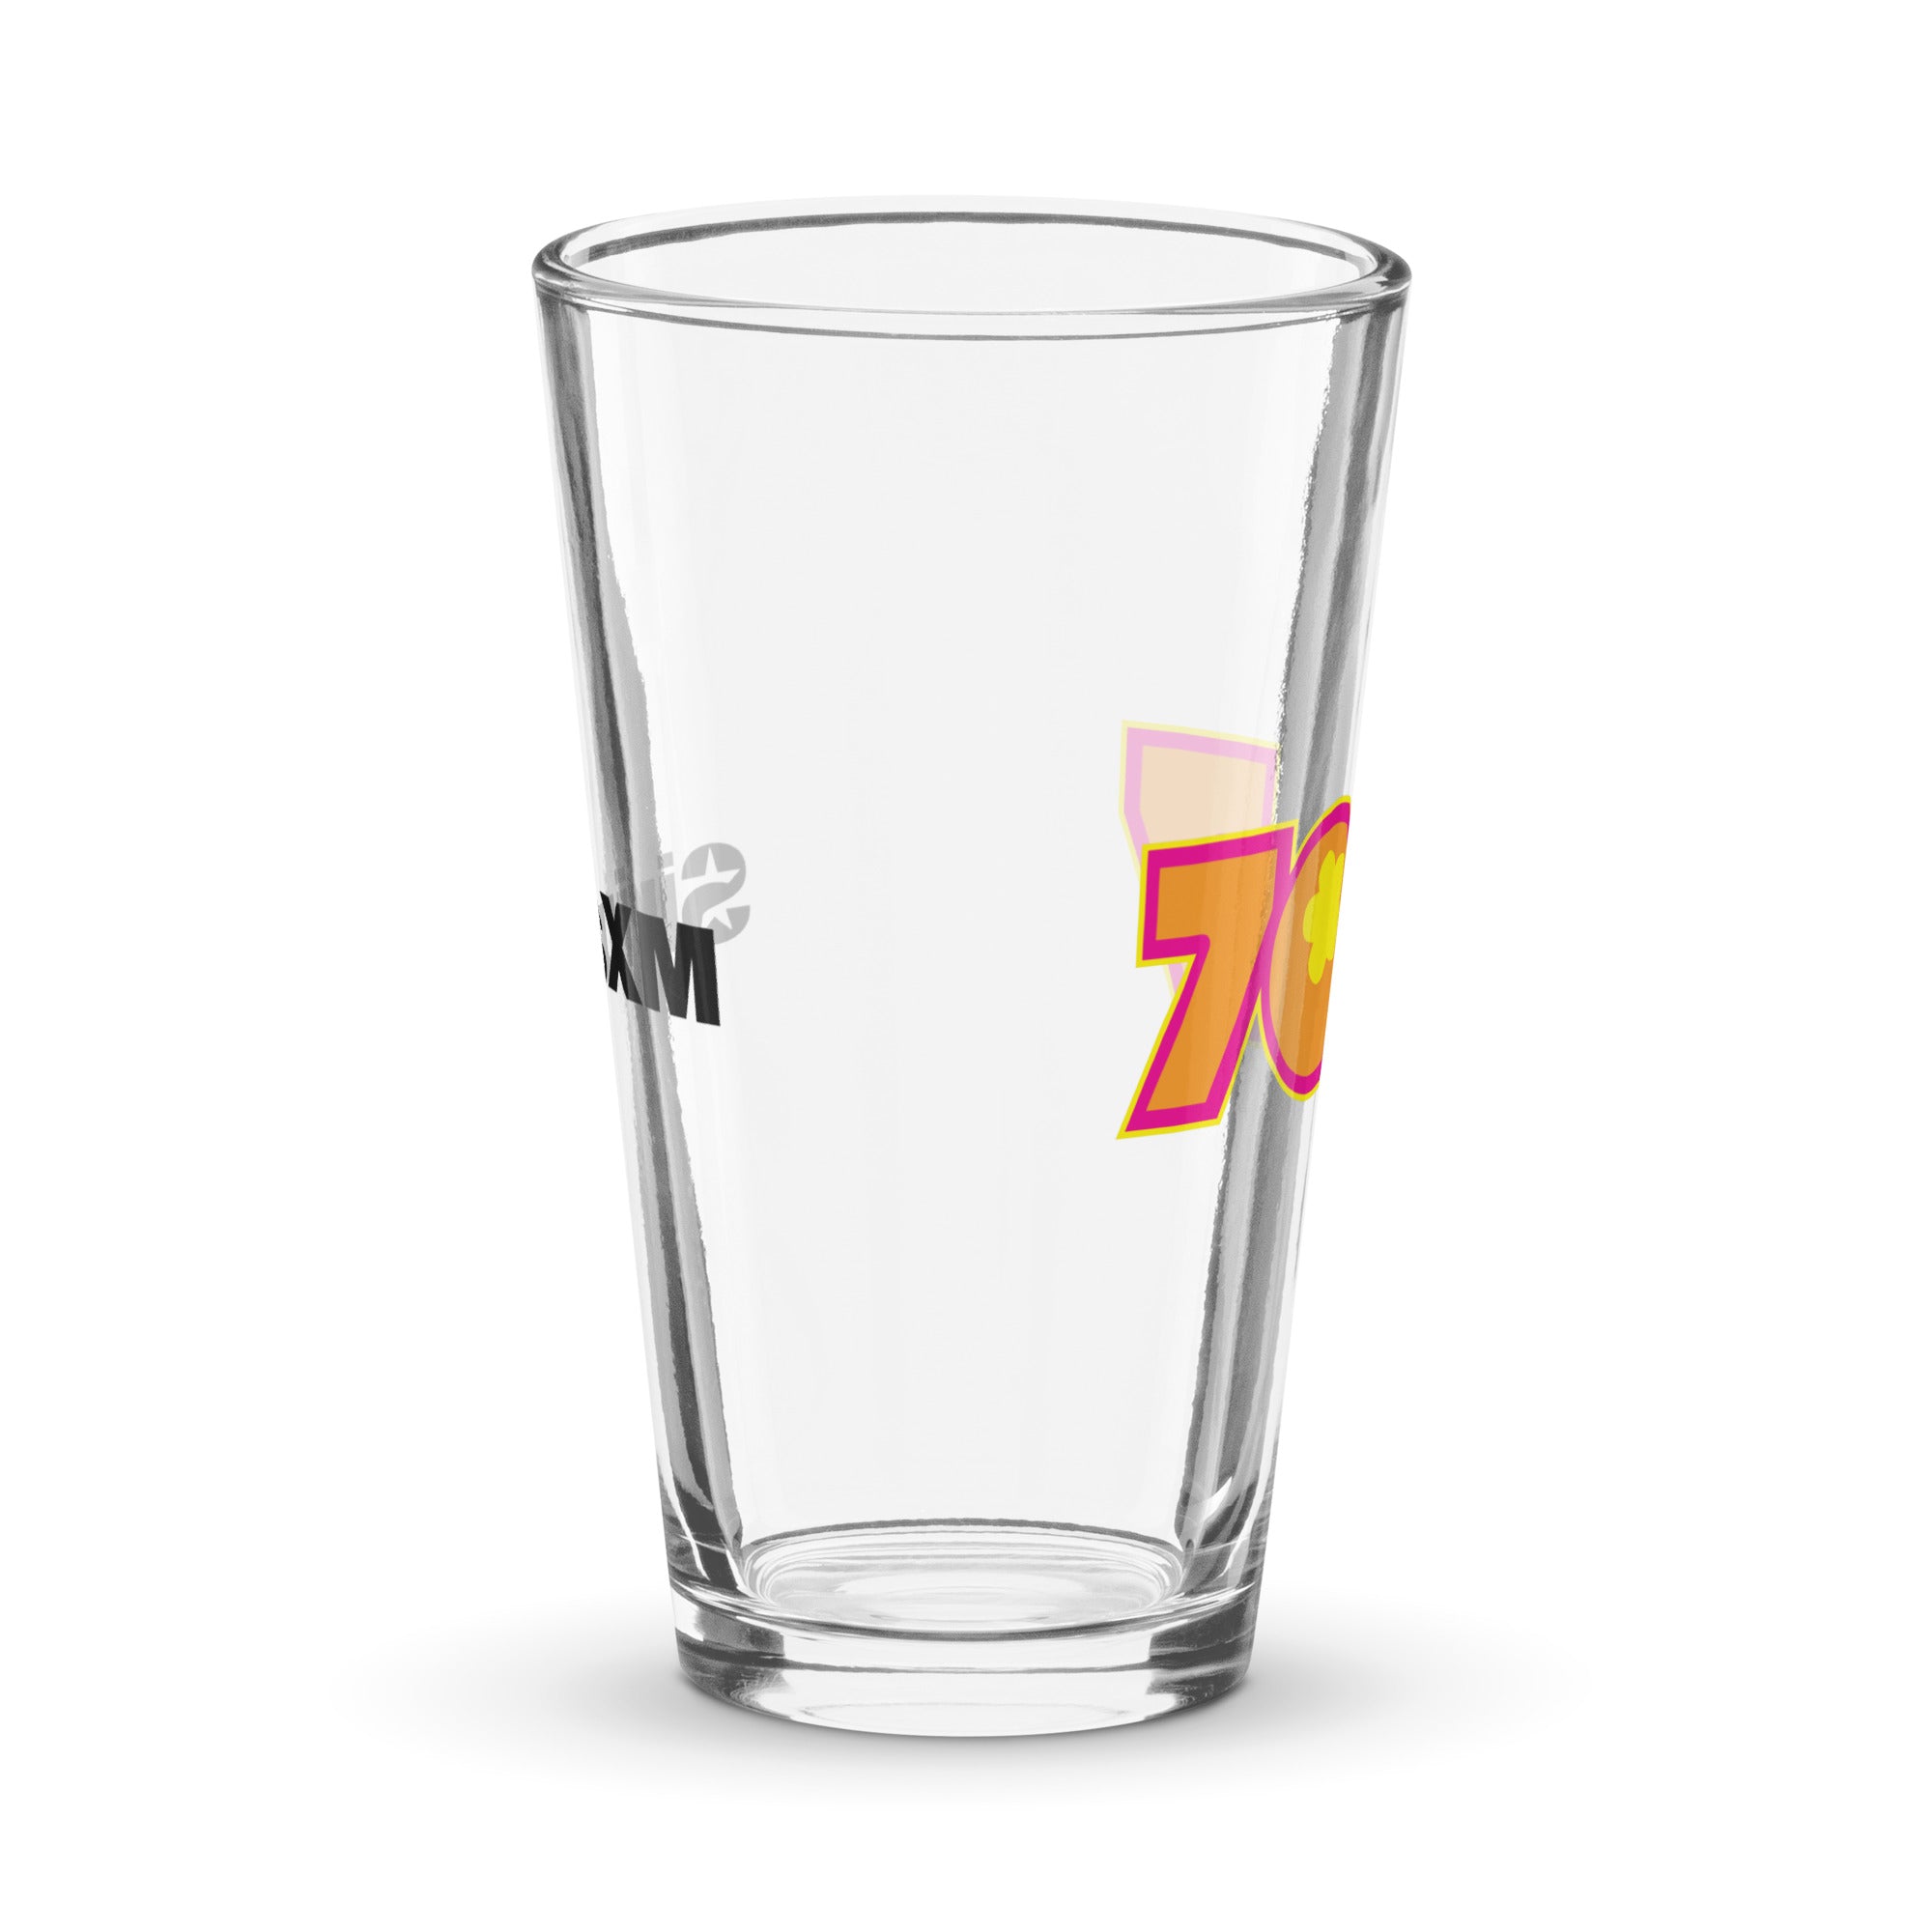 70s on 7: Pint Glass